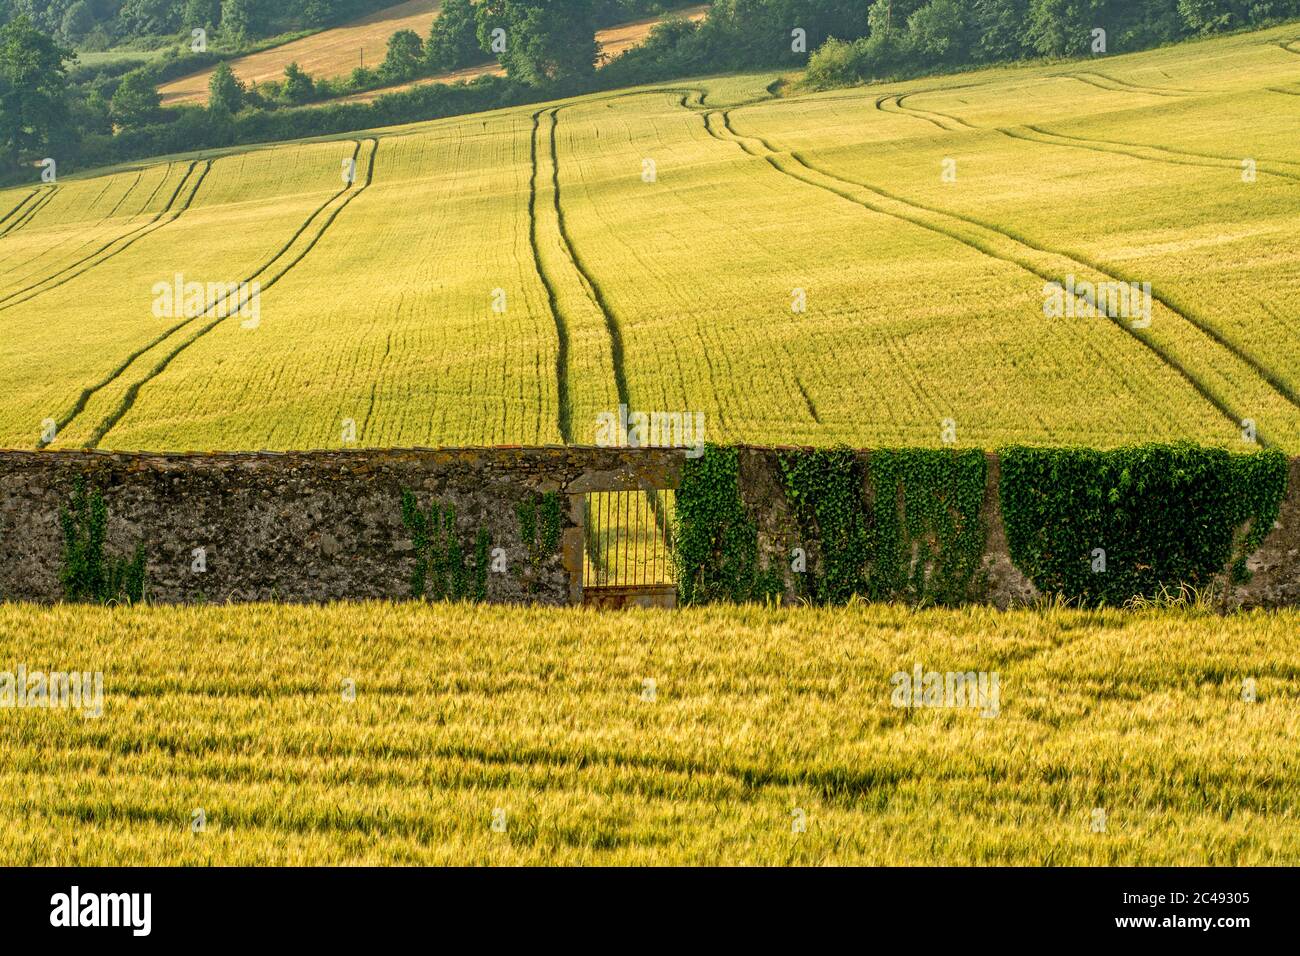 Portal and field of wheat, Puy de Dome, Auvergne-Rhone-Alpes, France Stock Photo